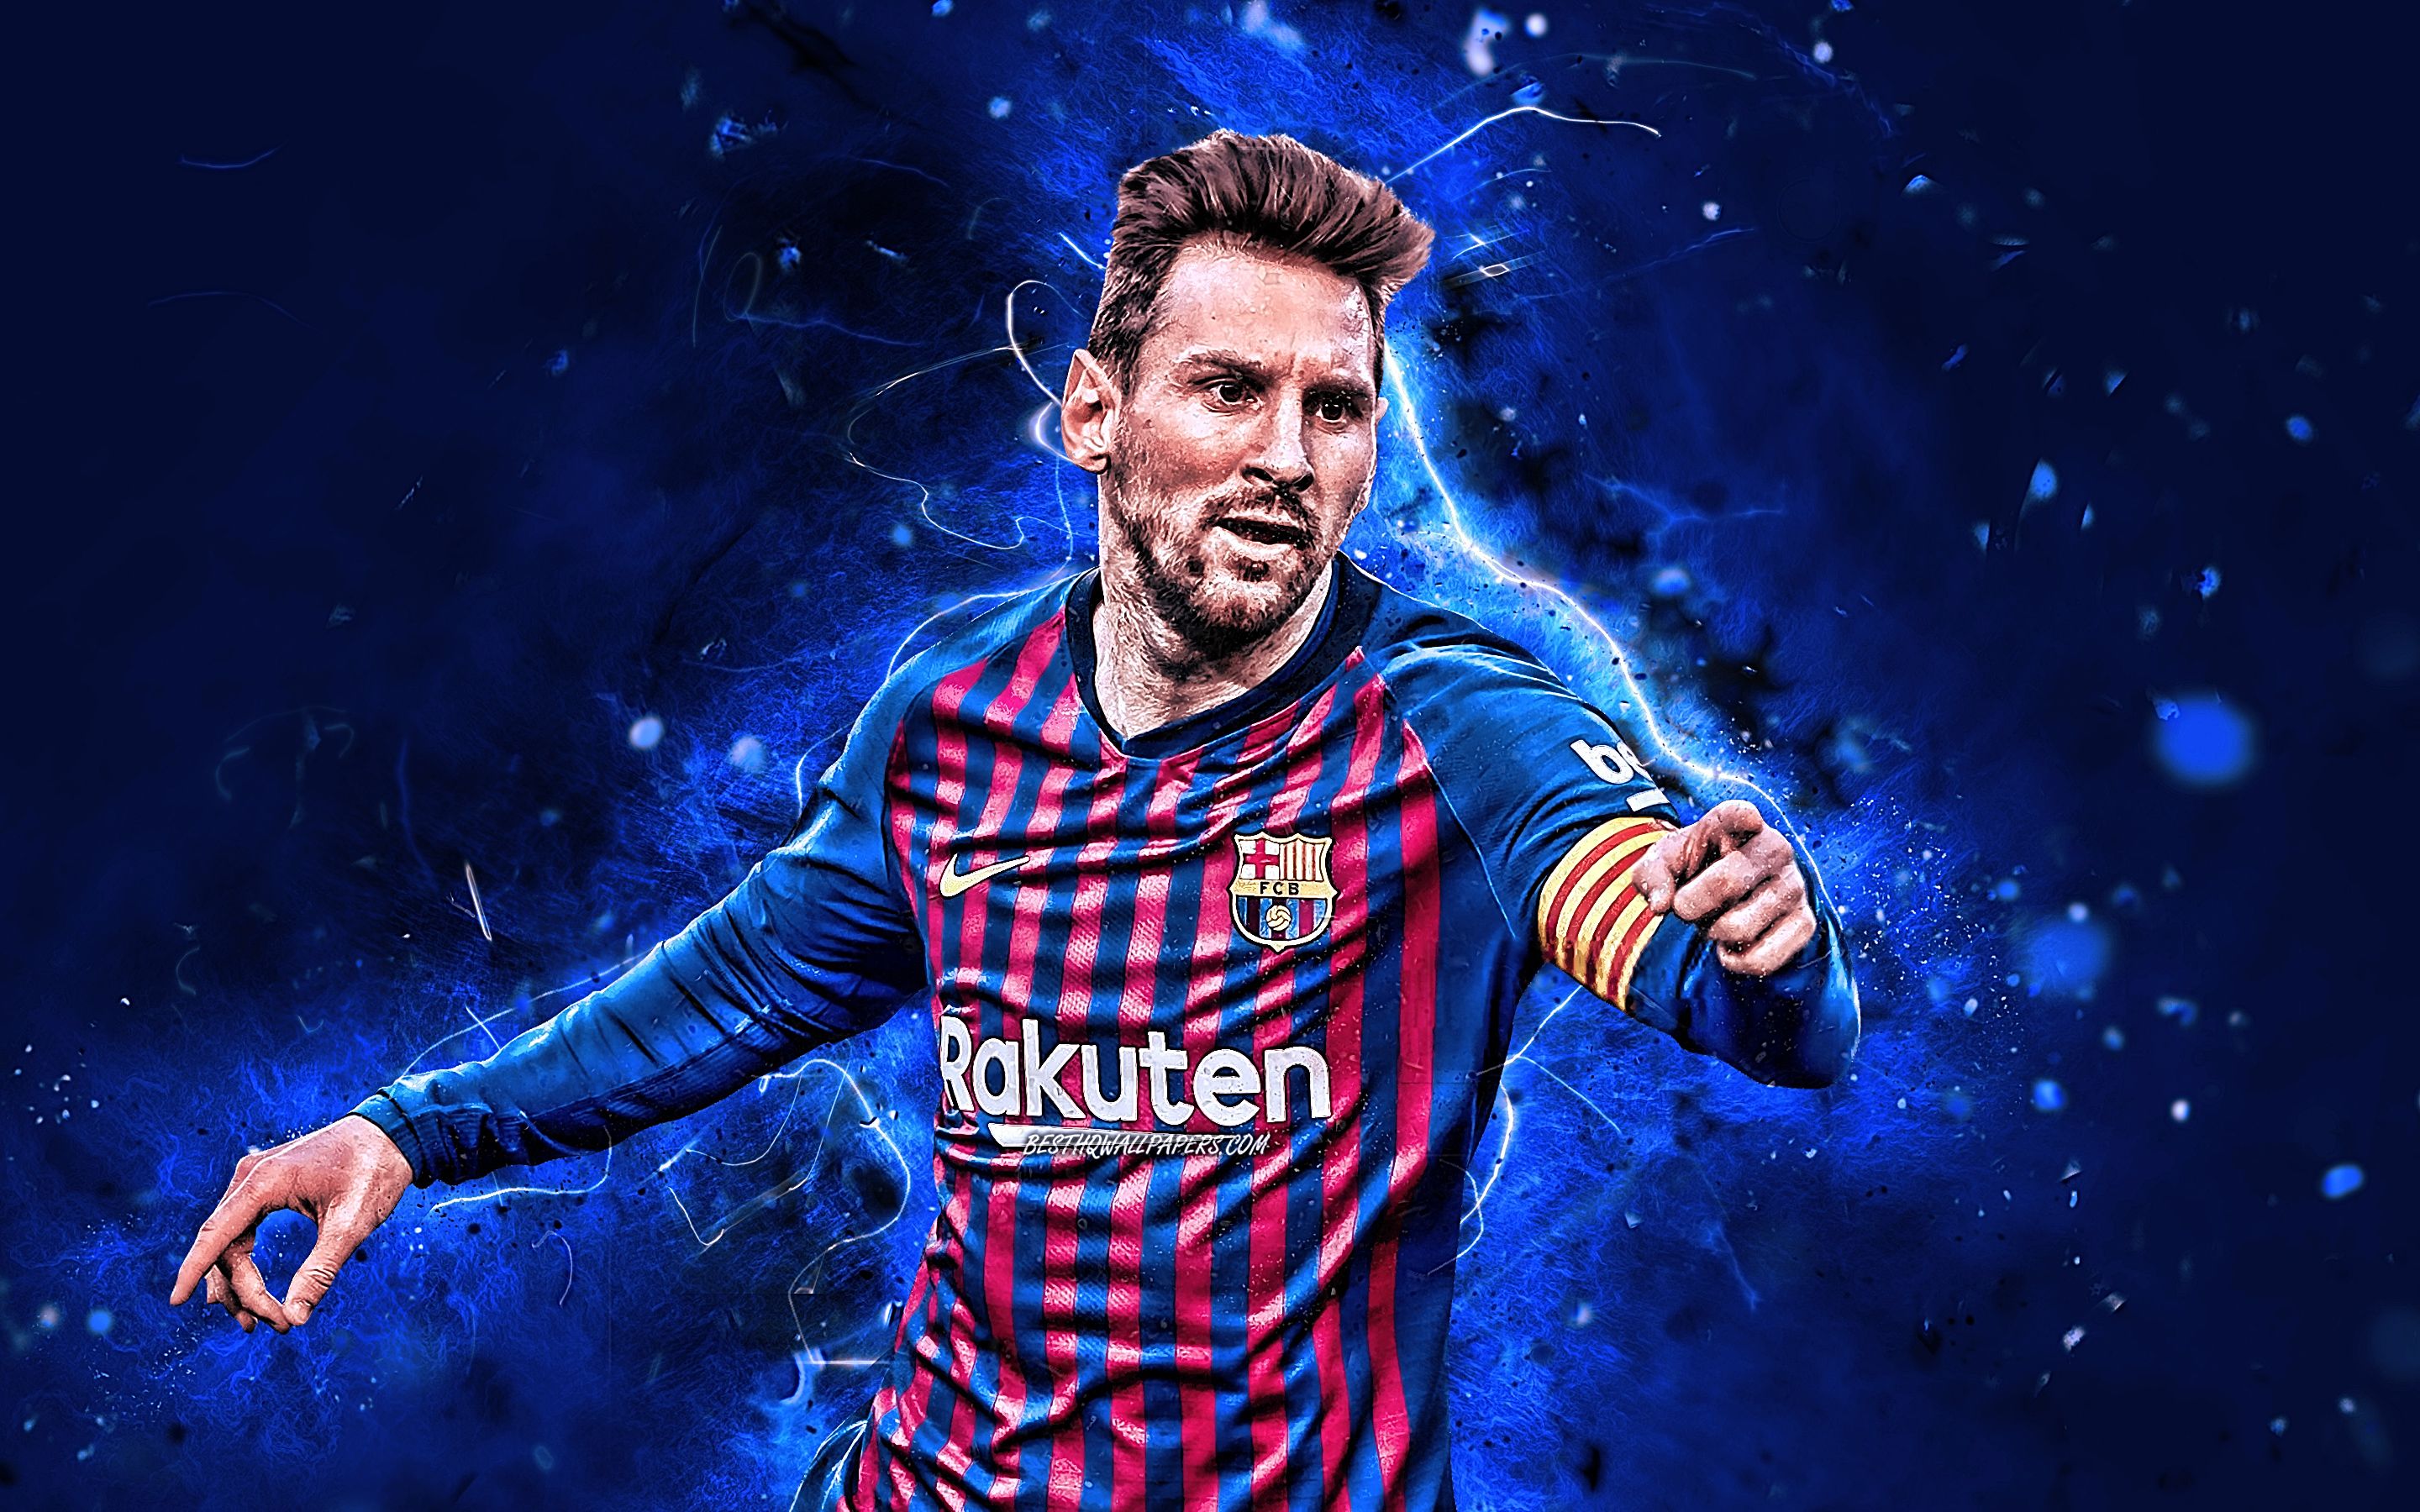 Download Wallpaper Lionel Messi, Close Up, FCB, Barcelona FC, Match, Argentinian Footballers, La Liga, Messi, Football Stars, Leo Messi, Neon Lights, LaLiga, Spain, Barca, Soccer For Desktop With Resolution 2880x1800. High Quality HD